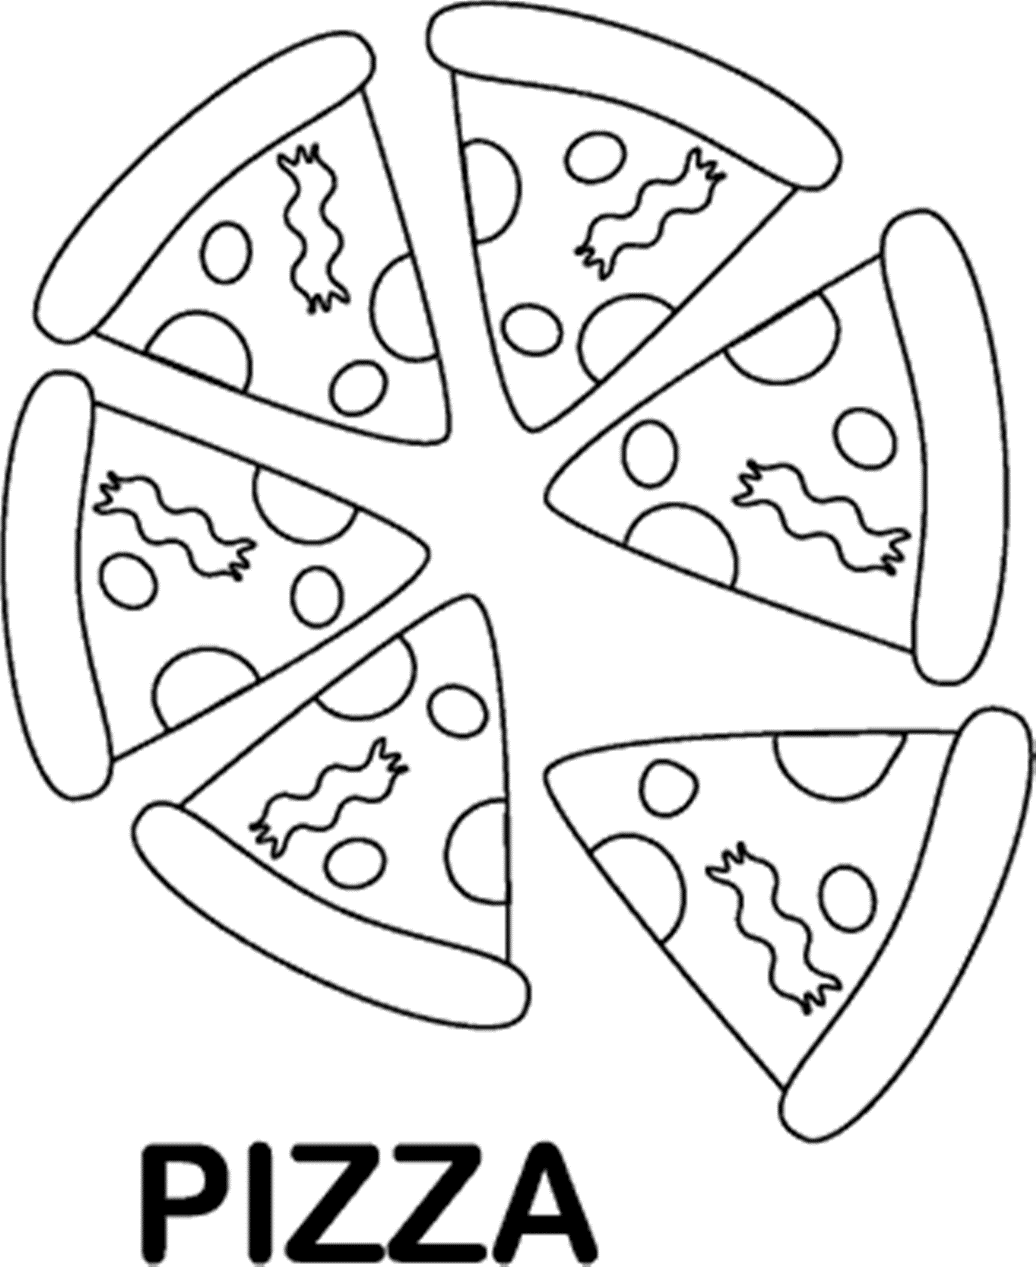 Pizza Steve Coloring Pages Pizza Coloring Pages. Kids Coloring ...